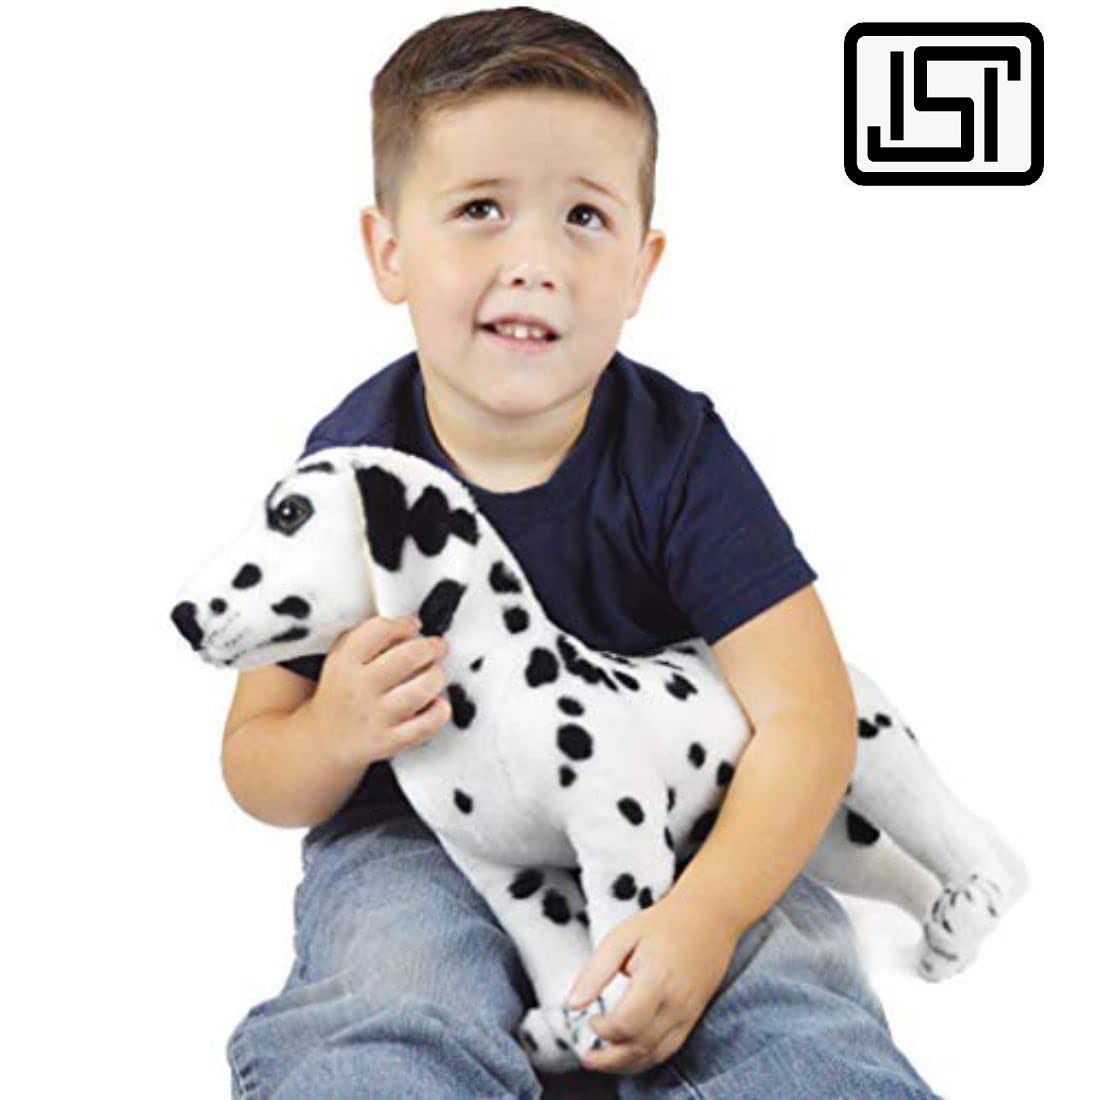     			Tickles Baby Simulation Standing Dalmation Puppy Dog Soft Stuffed Plush Animal Toy for Kids Birthday Gift  (Size: 30 cm Color: White)